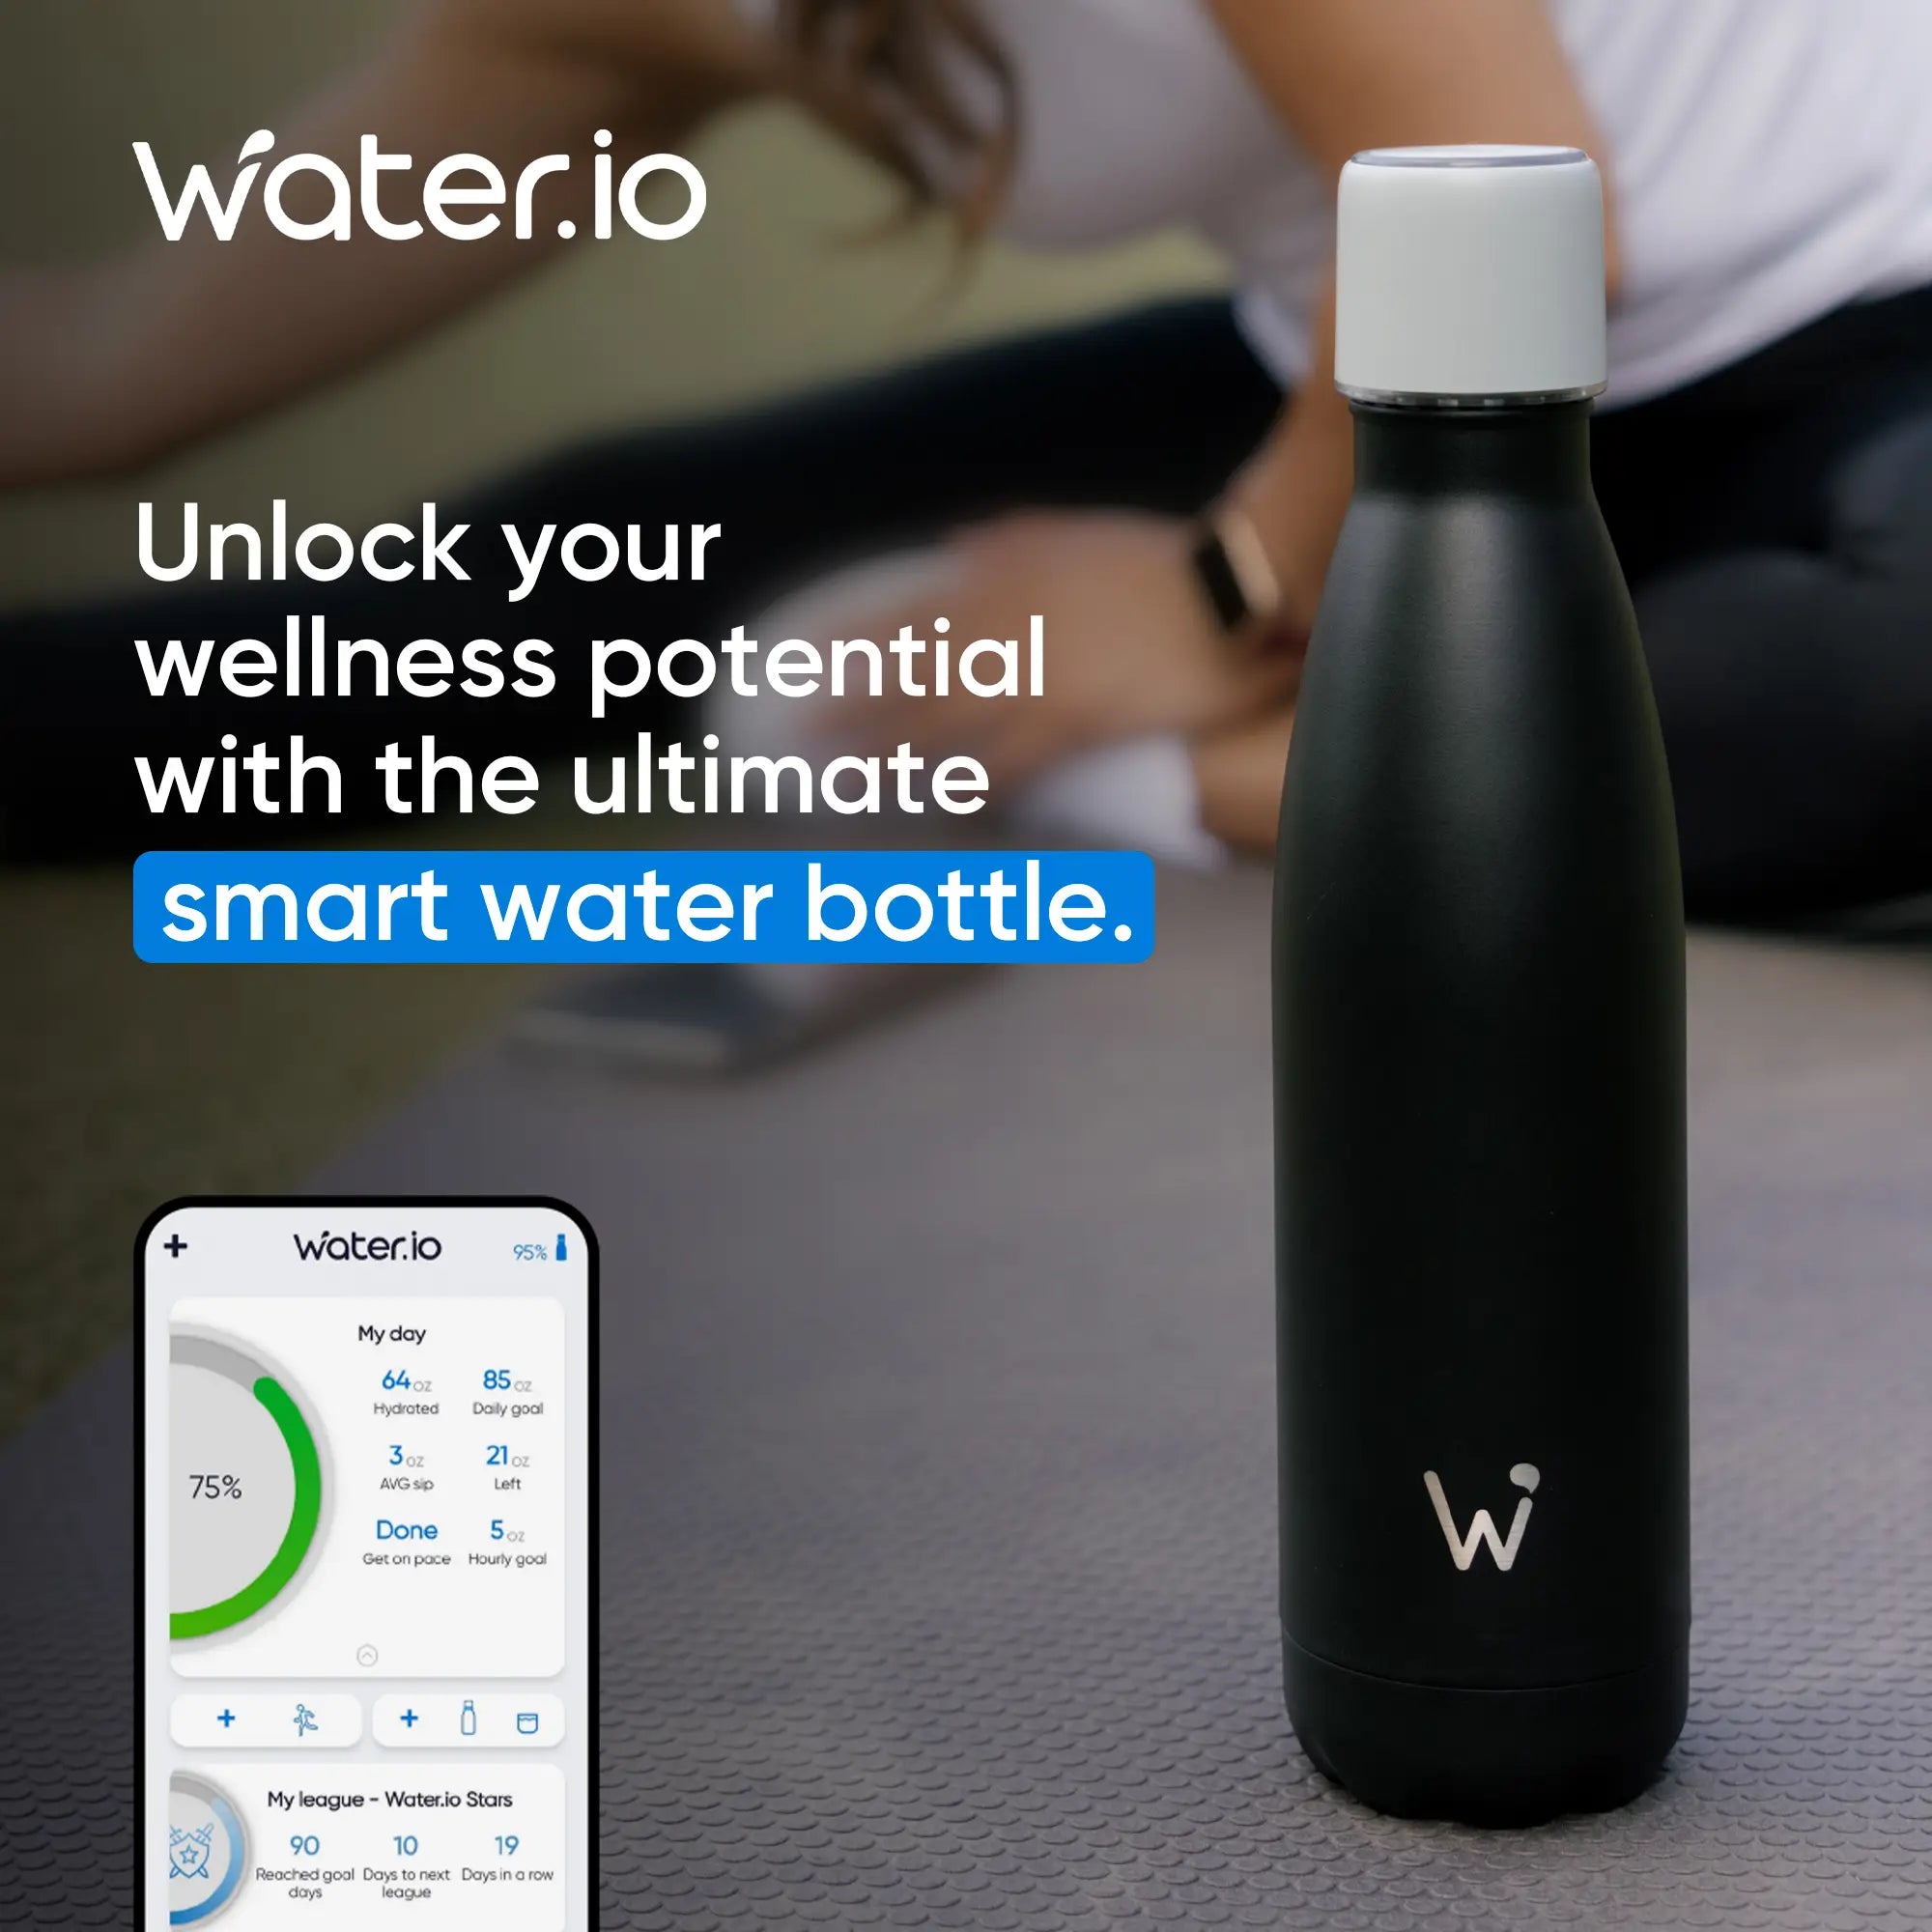 Unlock your wellness potential with the ultimate smart water bottle